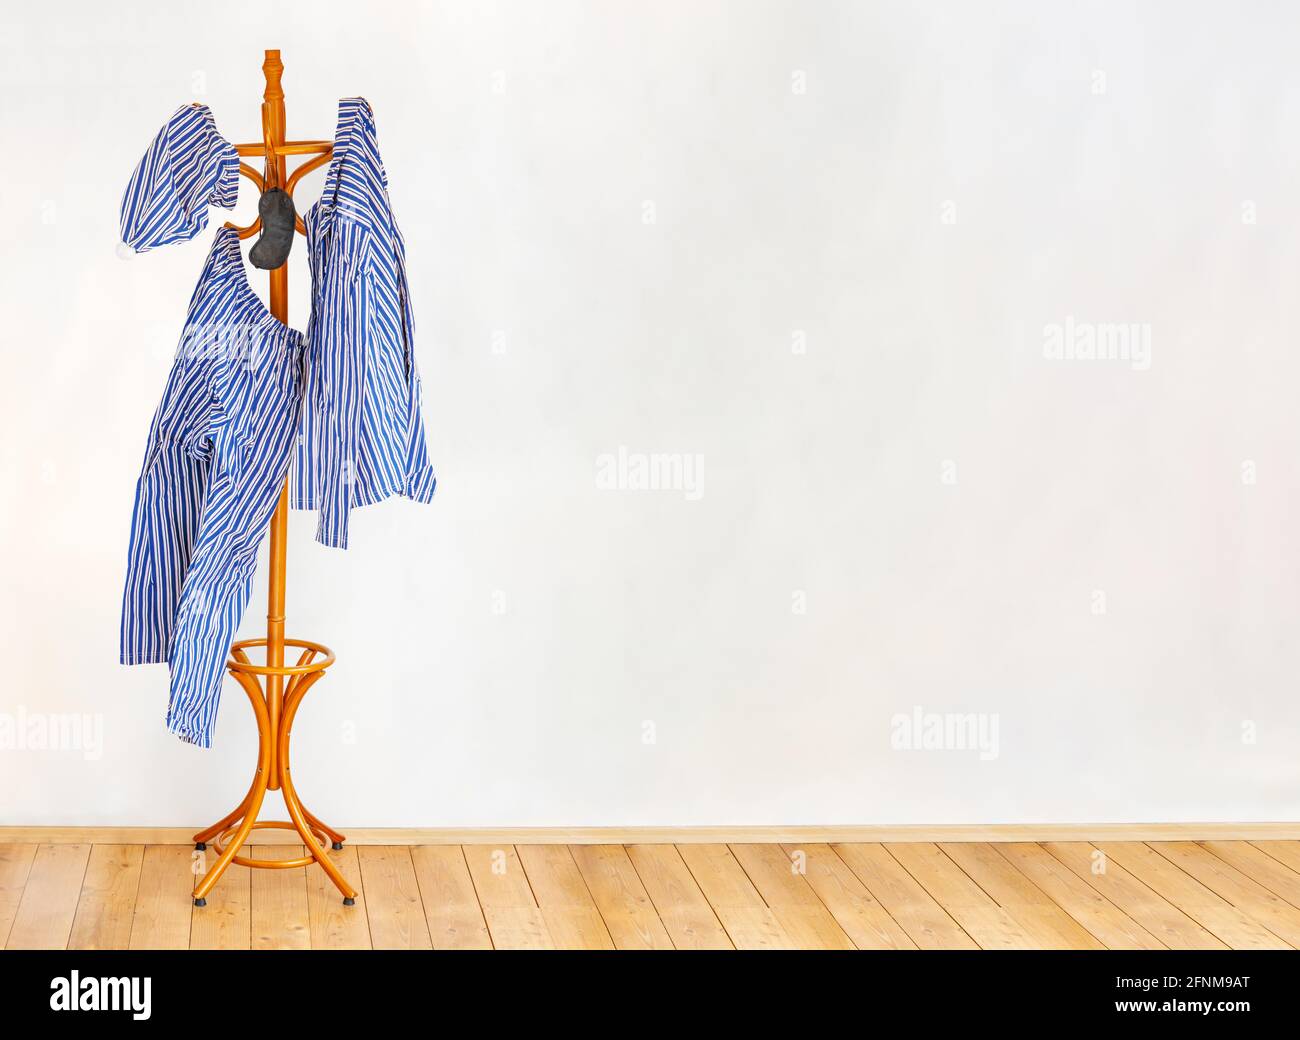 The striped pajamas hangs on the coat hook in an empty room with wooden floor. Stock Photo